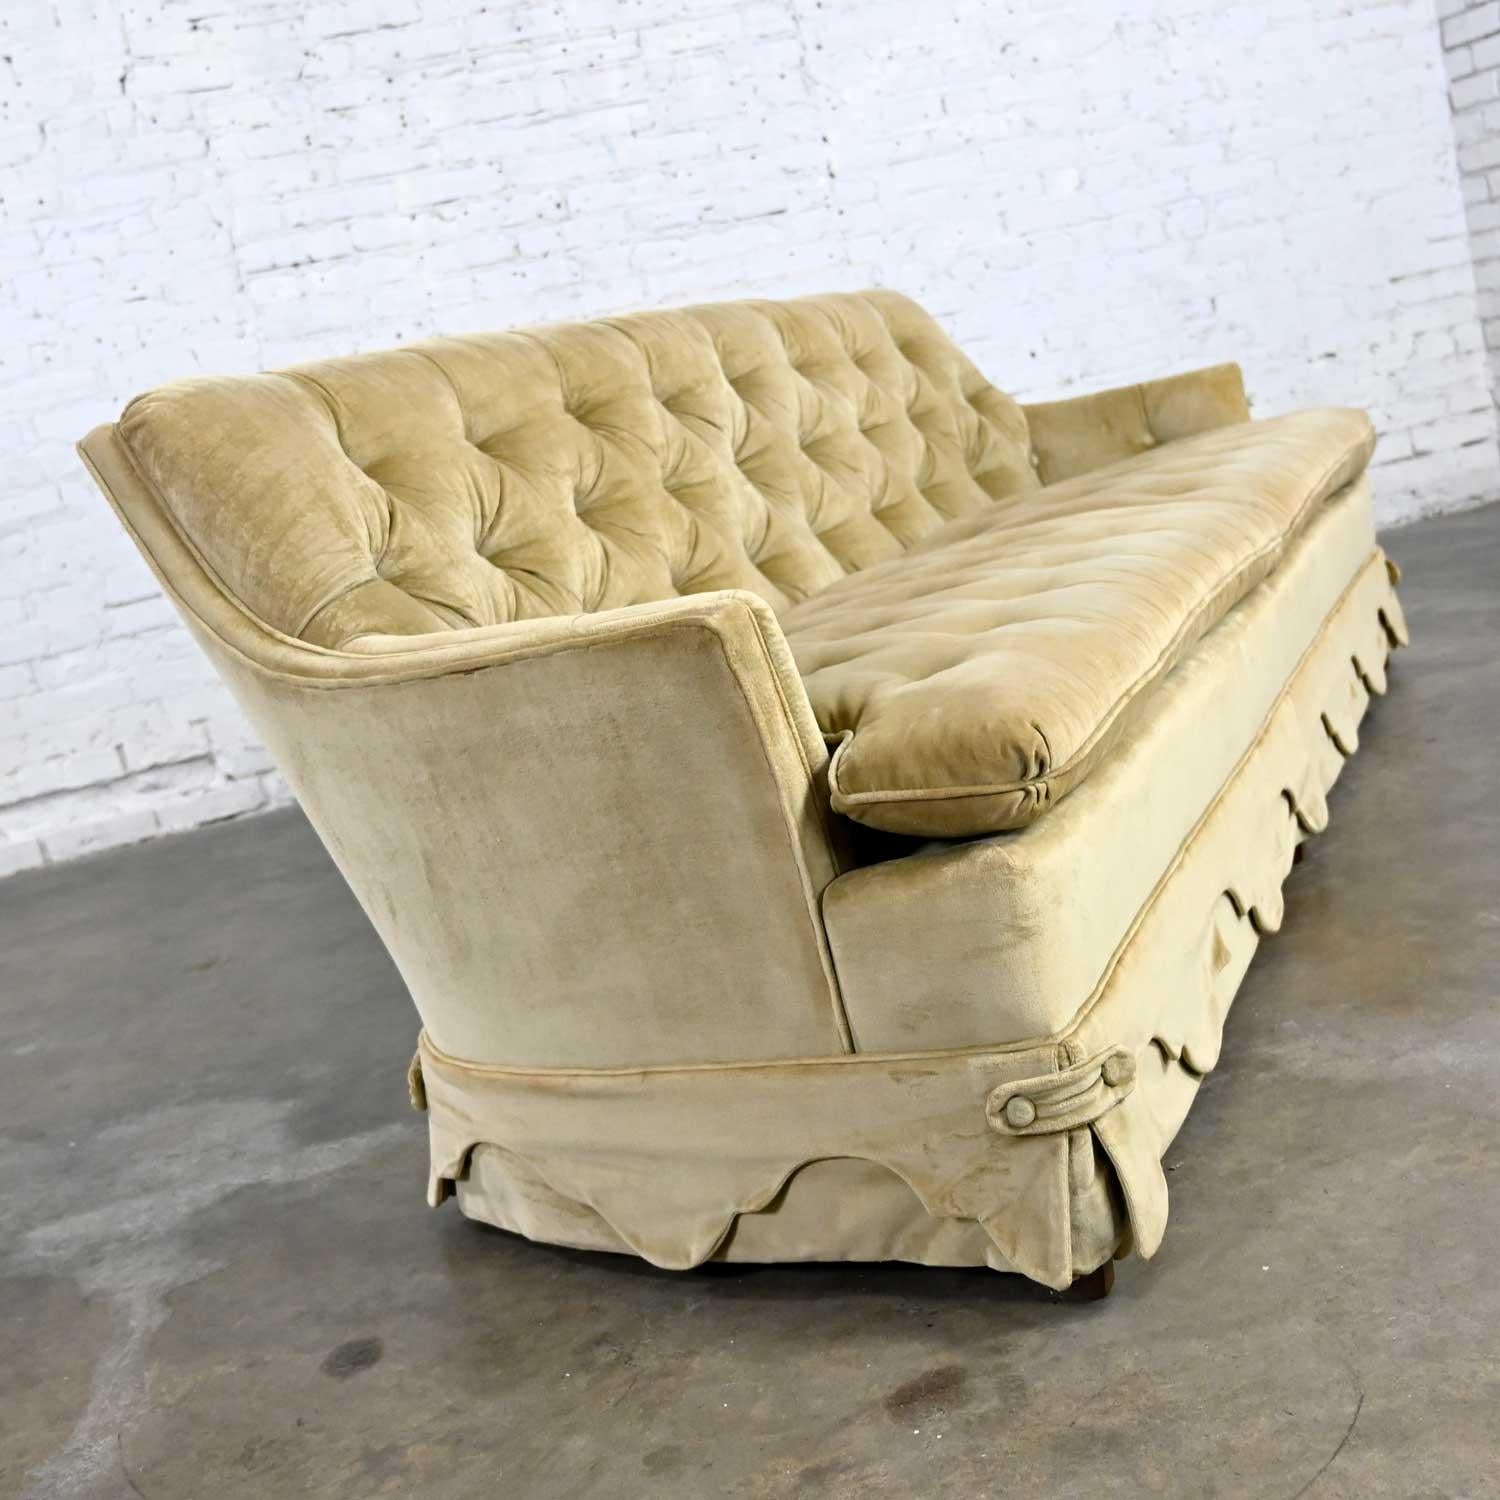 20th Century Vintage Hollywood Regency Tawny Colored Button Tufted Velvet Sofa by Heritage